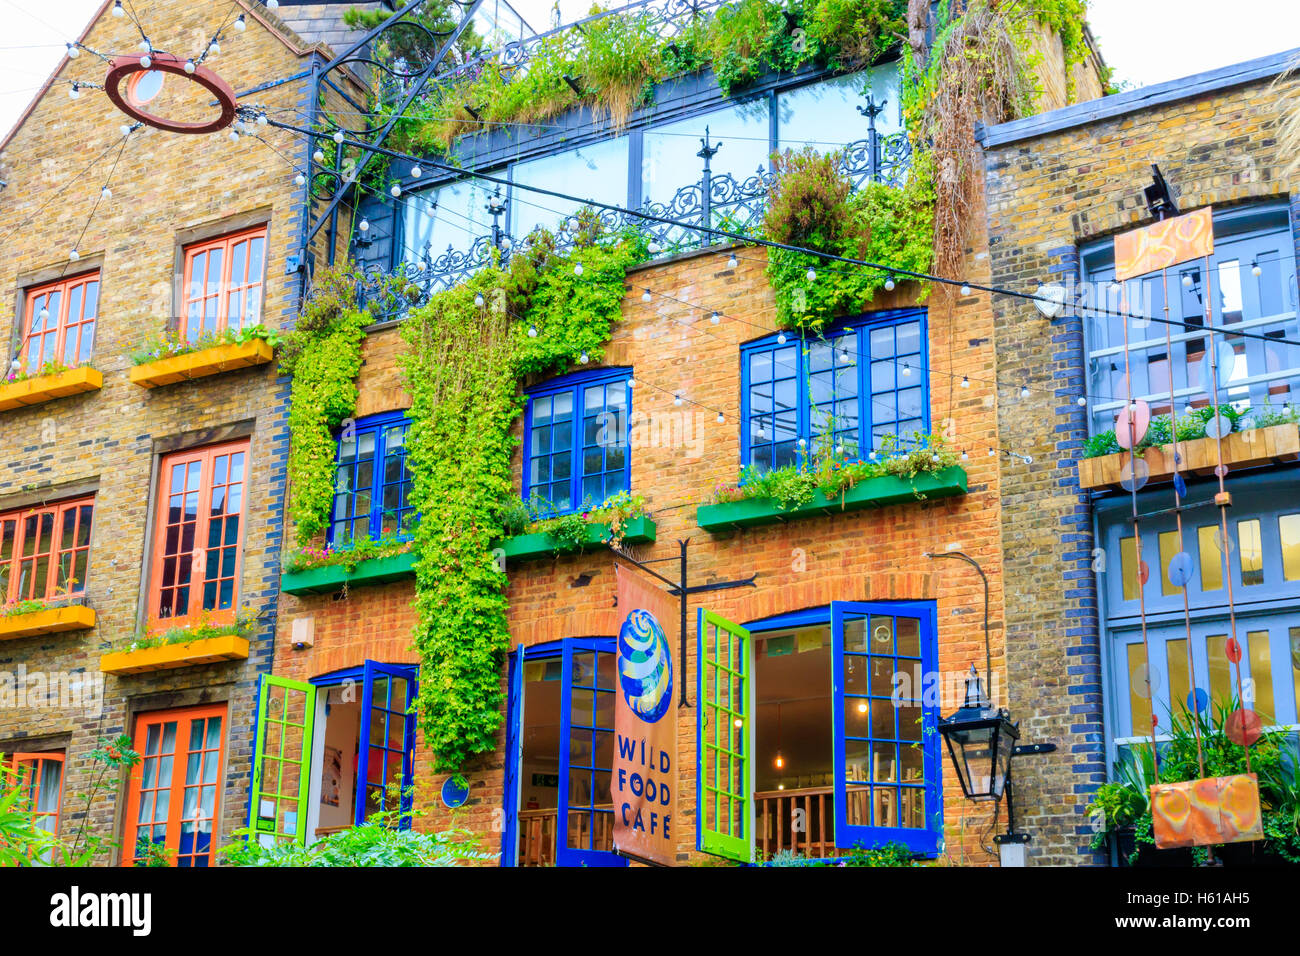 London, UK - August 2, 2016 - Neal’s Yard, a small alley in Covent Garden area Stock Photo